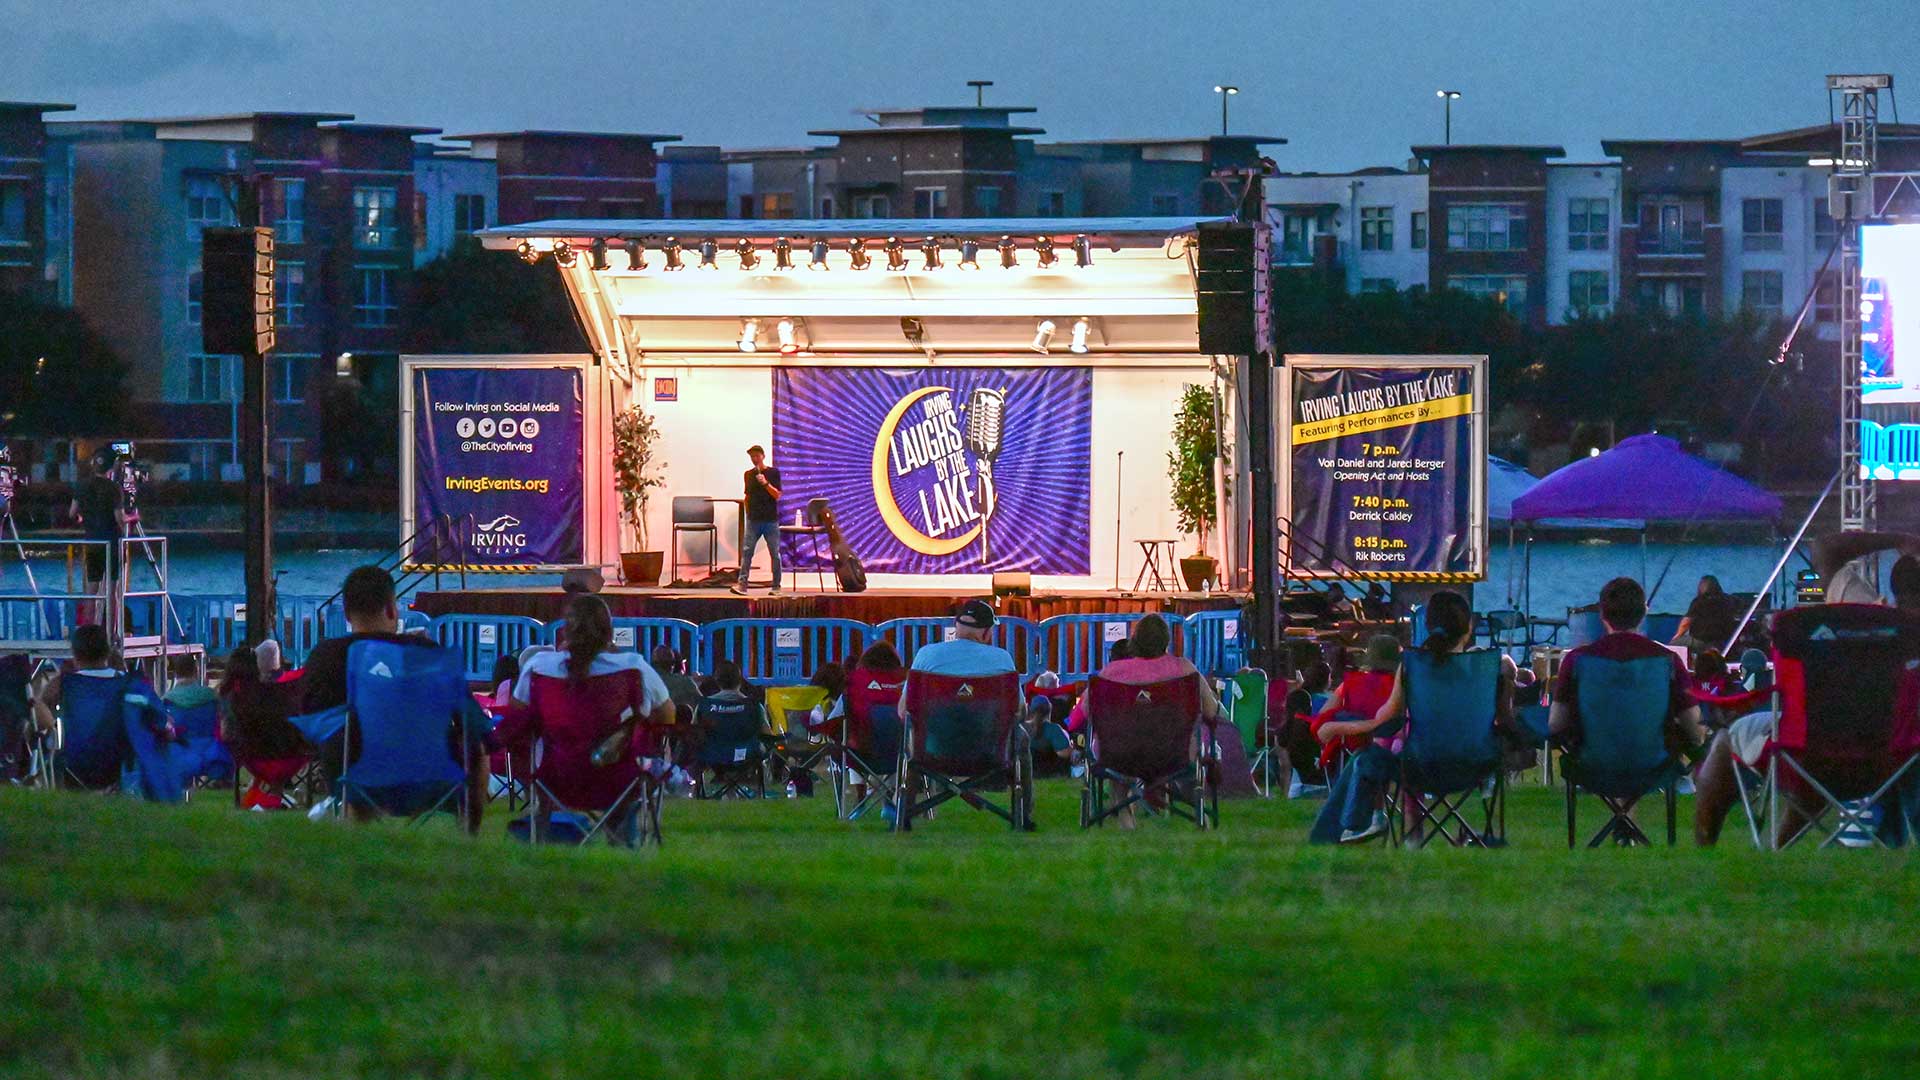 A stage is setup in front of a lake at night. People sit on a lawn in camping chairs watching a comedian on stage.